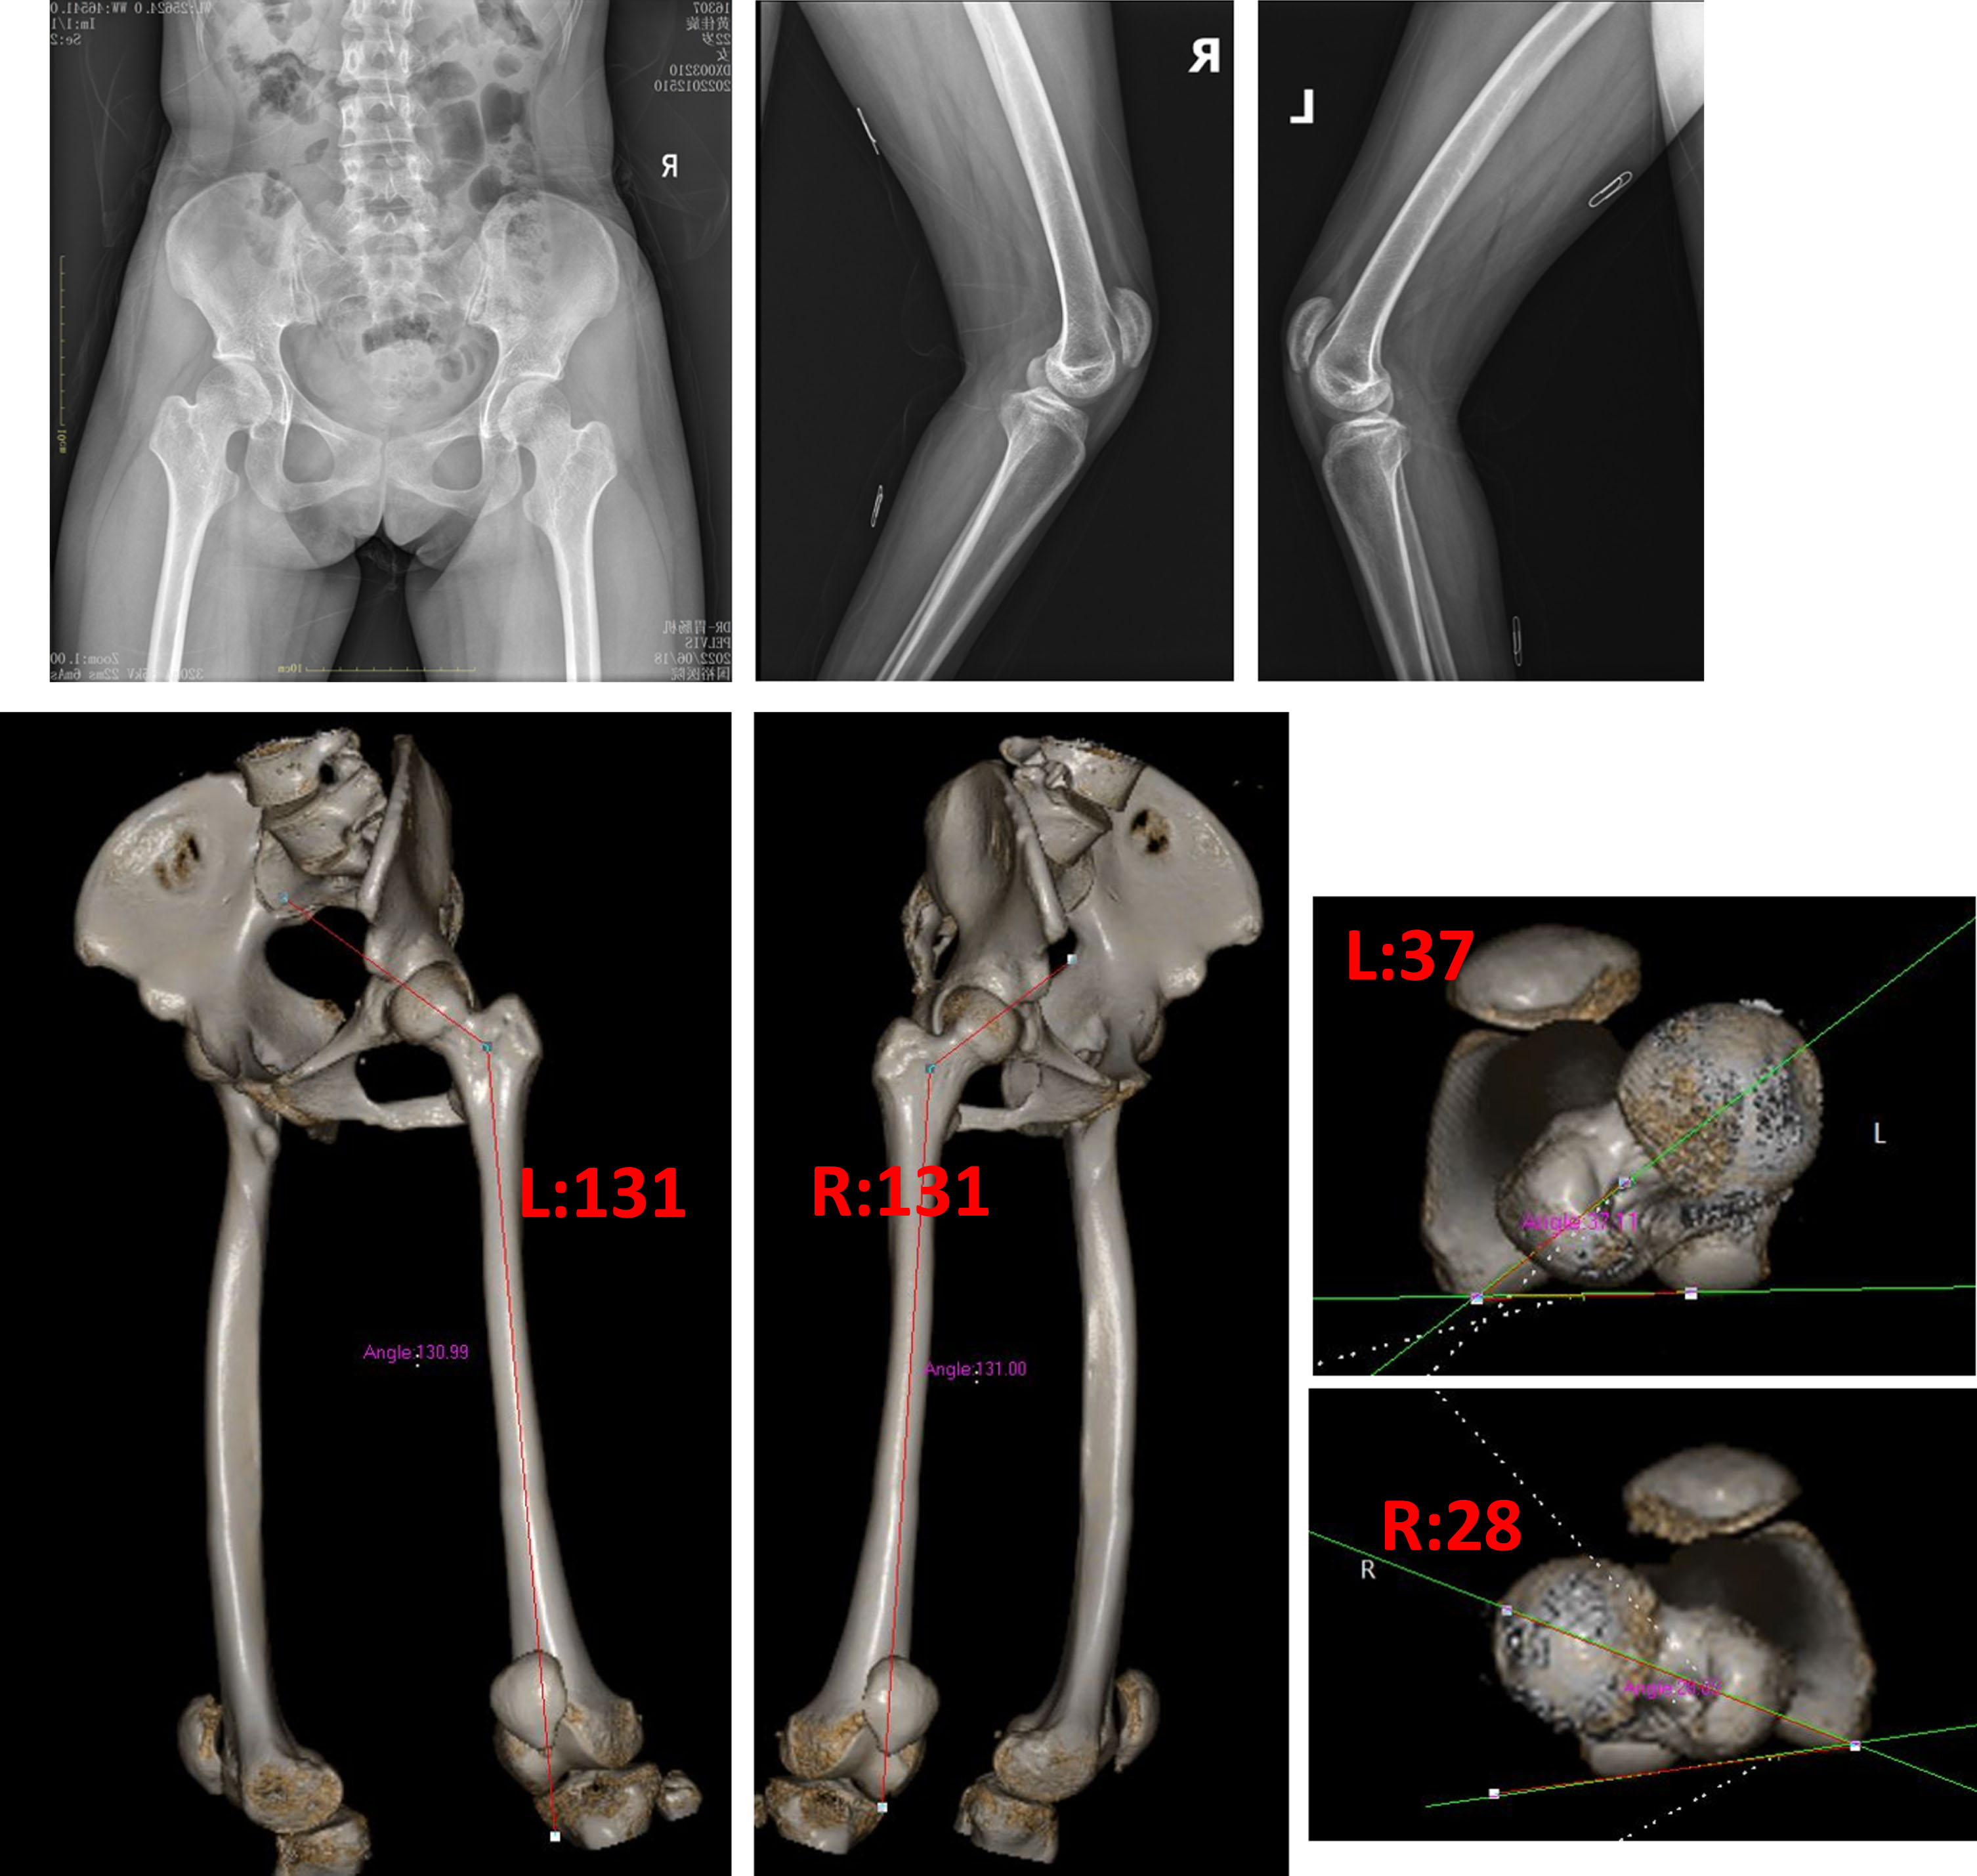 Preoperative imaging revealed good coverage of the hips, knee flexion, and patella alta. On the CT anteversion, the left was 37 degrees and the right 28 degrees. The neck shaft angle was 131 degrees bilaterally.